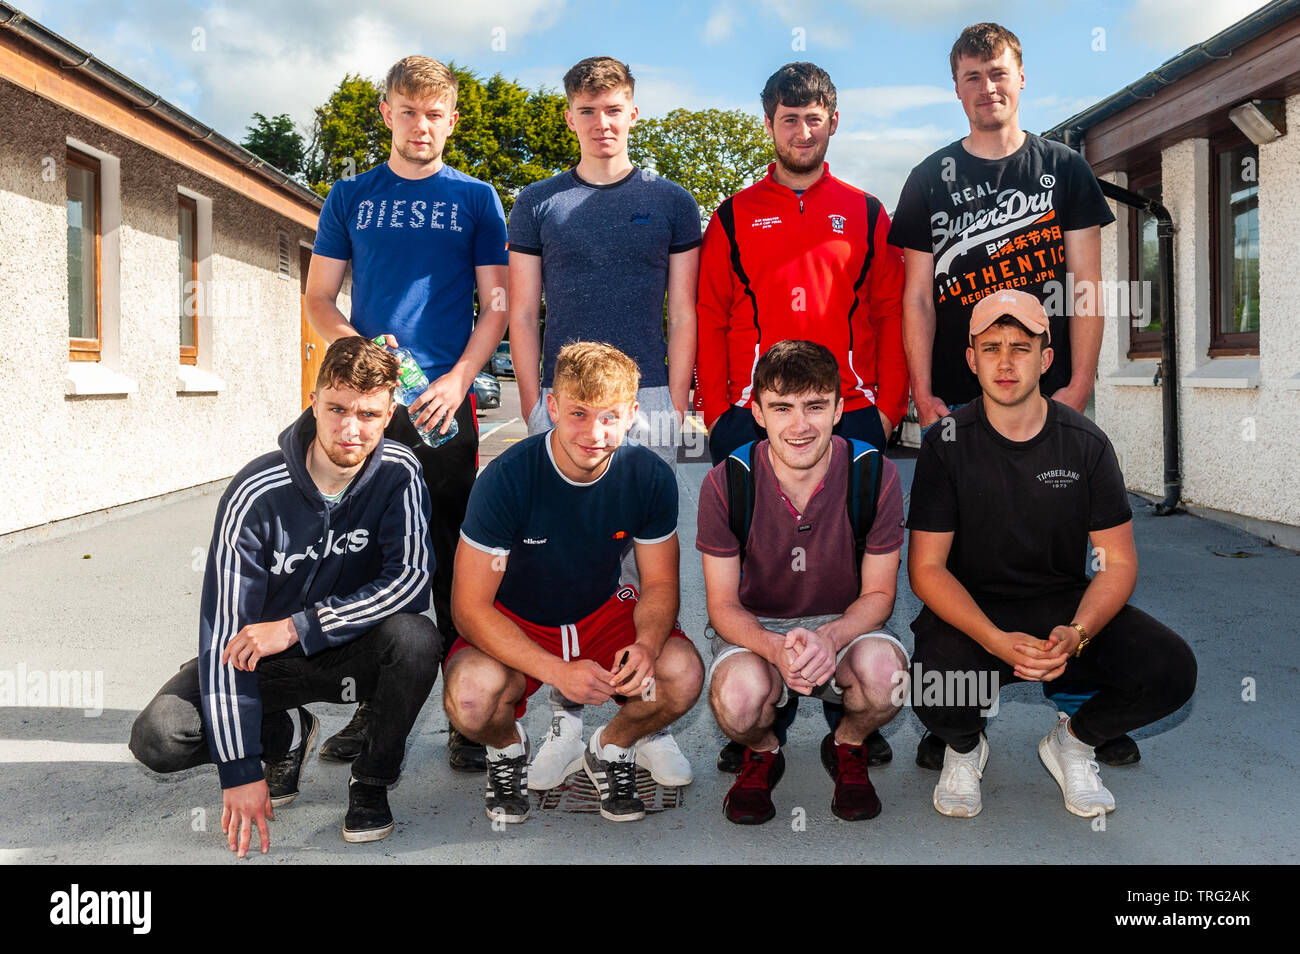 Schull, West Cork, Ireland. 5th June, 2019. The Leavingand Junior Cert exams started today for over 120,000 students in Ireland. English was the first Leaving Cert paper, followed by Home Economics. This group of lads were preparing to sit their first Leaving Cert exam. Credit: Andy Gibson/Alamy Live News Stock Photo